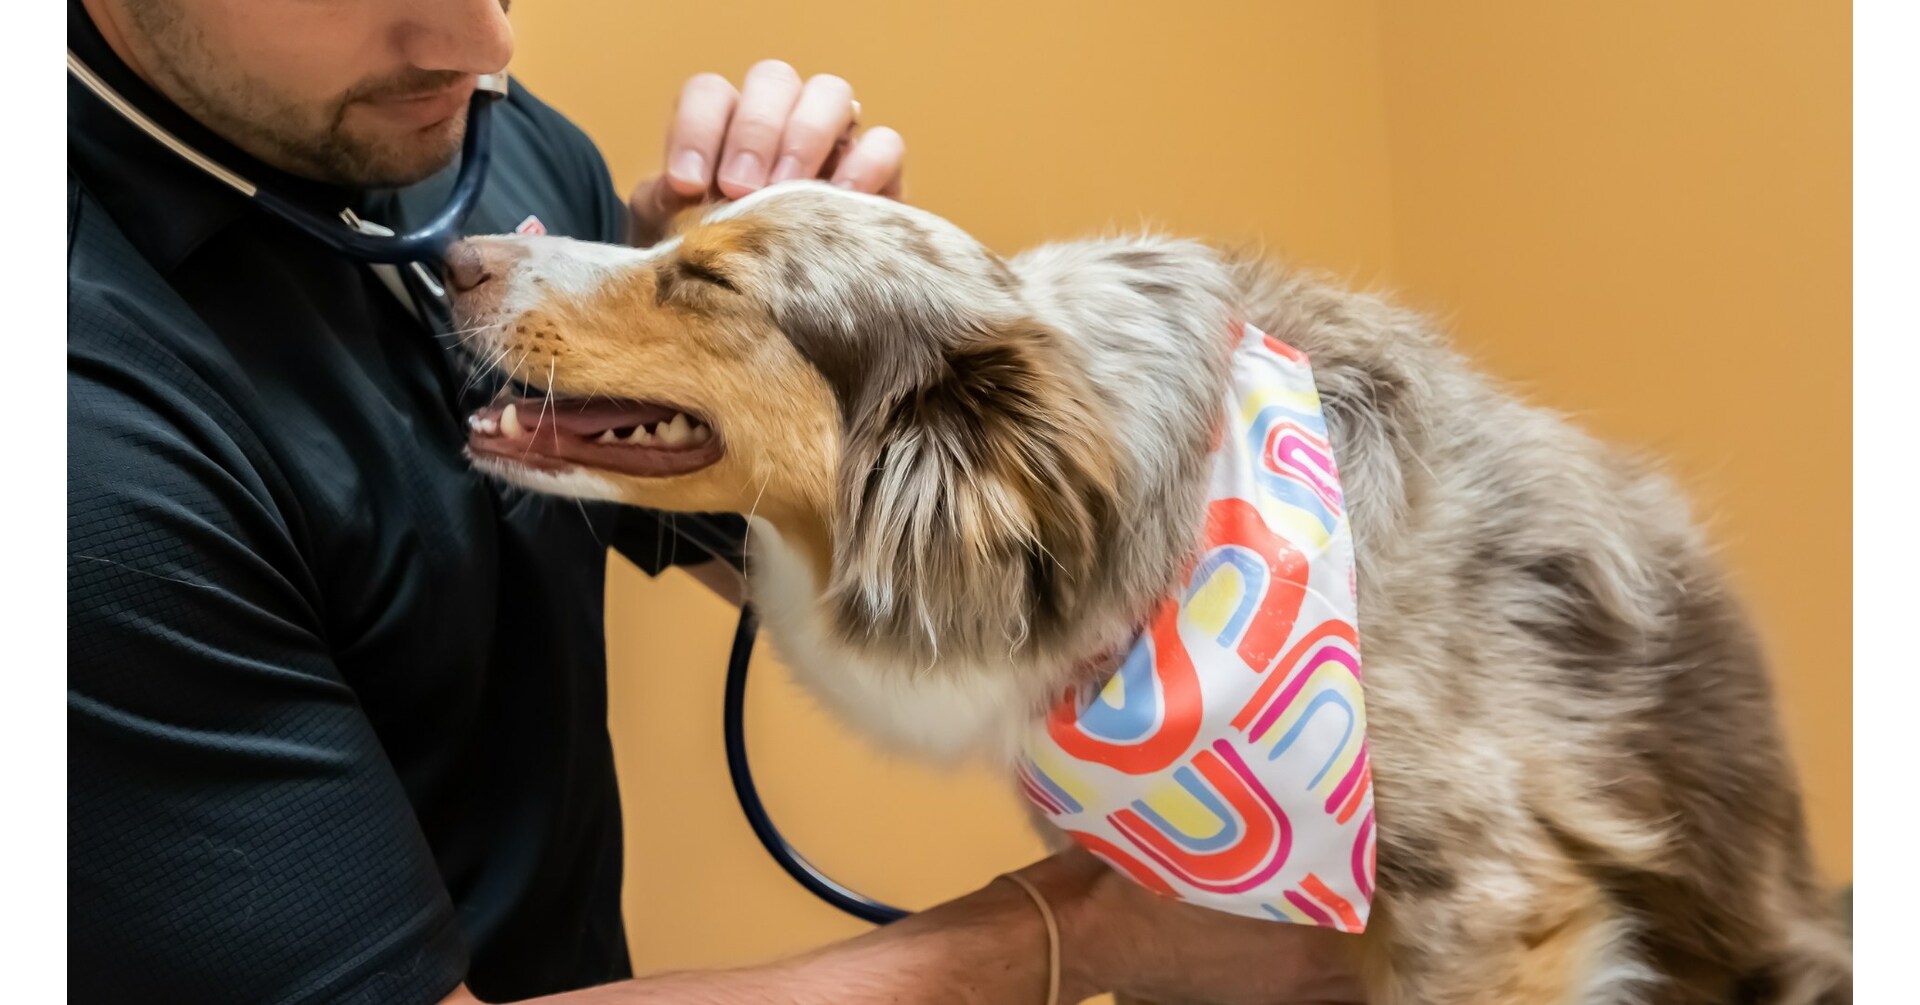  Binder Animal Hospital in St. Louis, Missouri Introduces Same-Day Urgent Care Services 